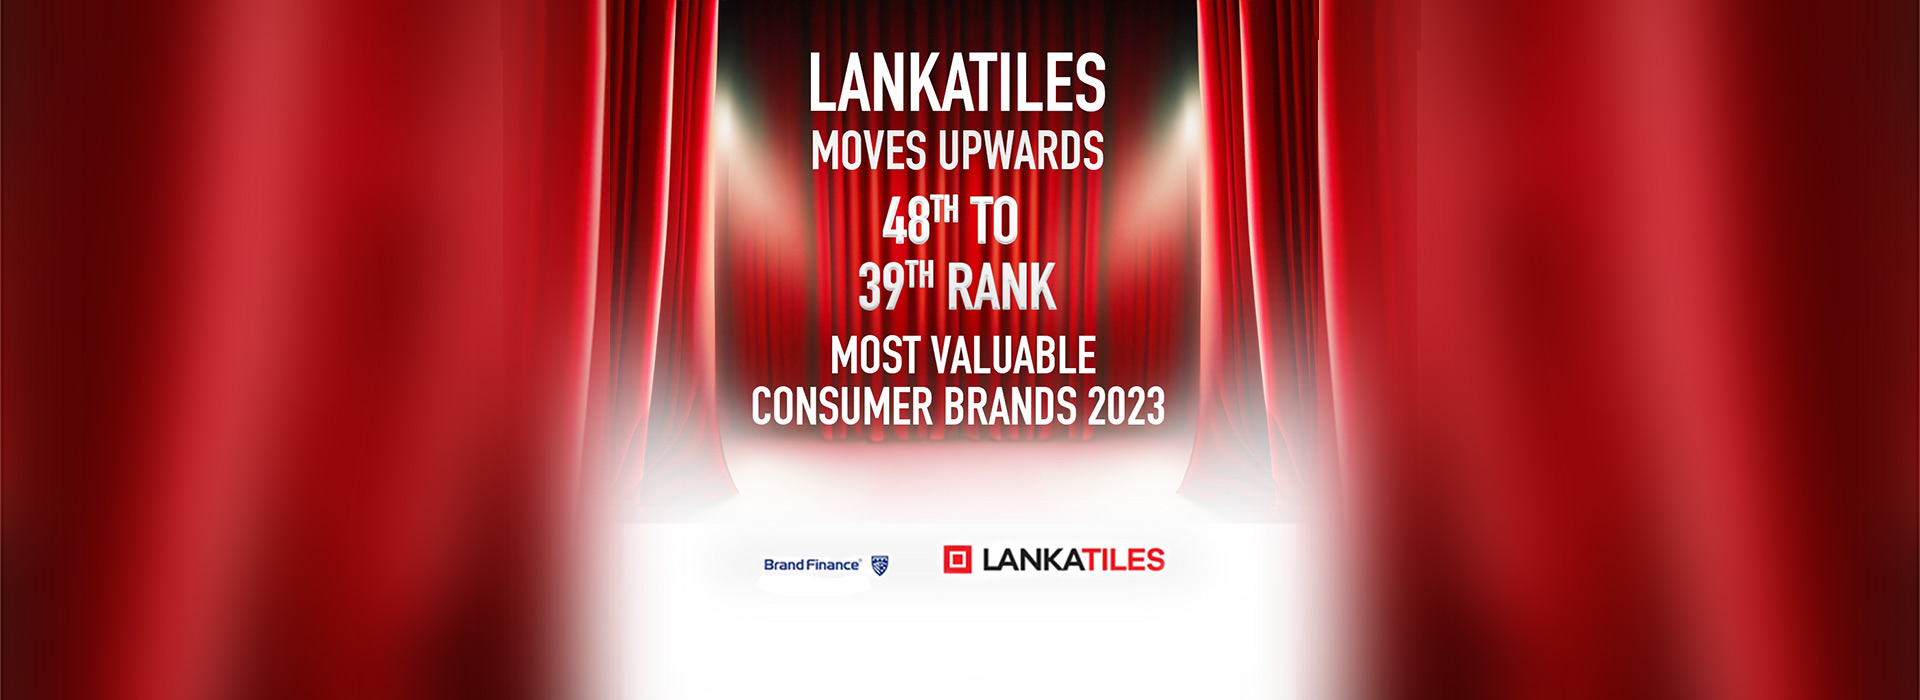 Lankatiles Rises To 39th Place In Brand Finance’s Most Valuable Consumer Brands 2023 Ranking